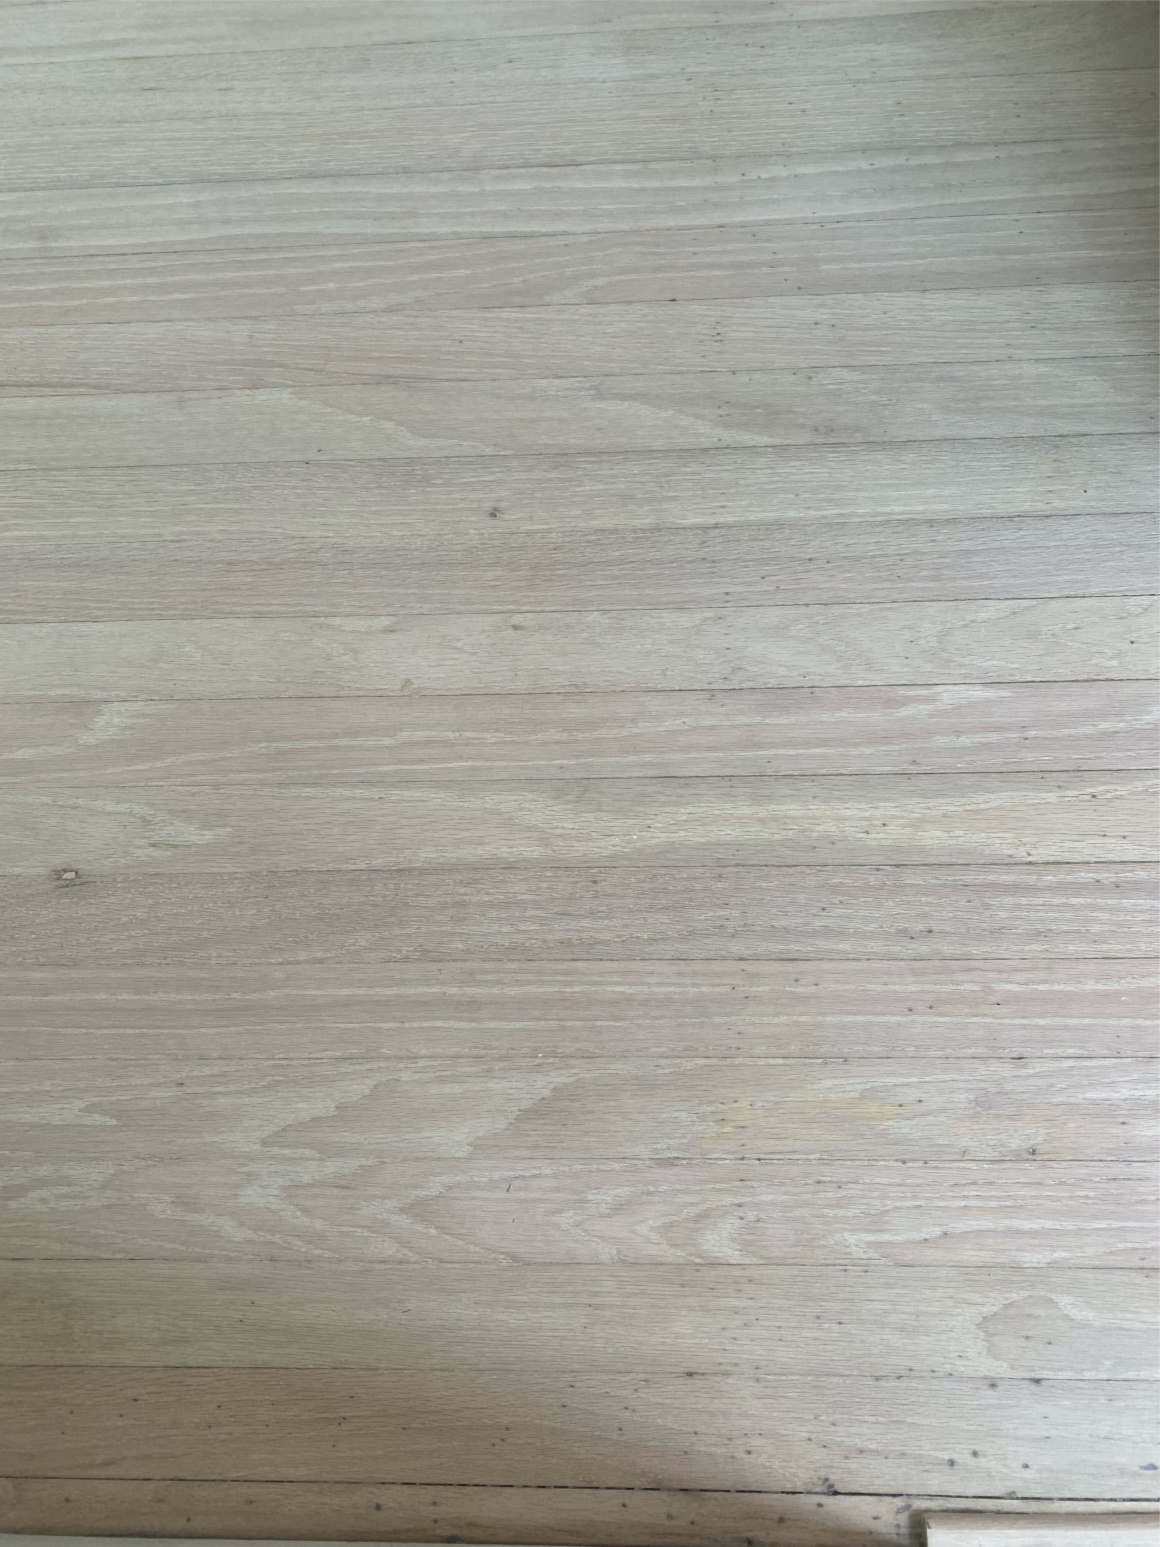 Our Refinished Oak Floors And Details